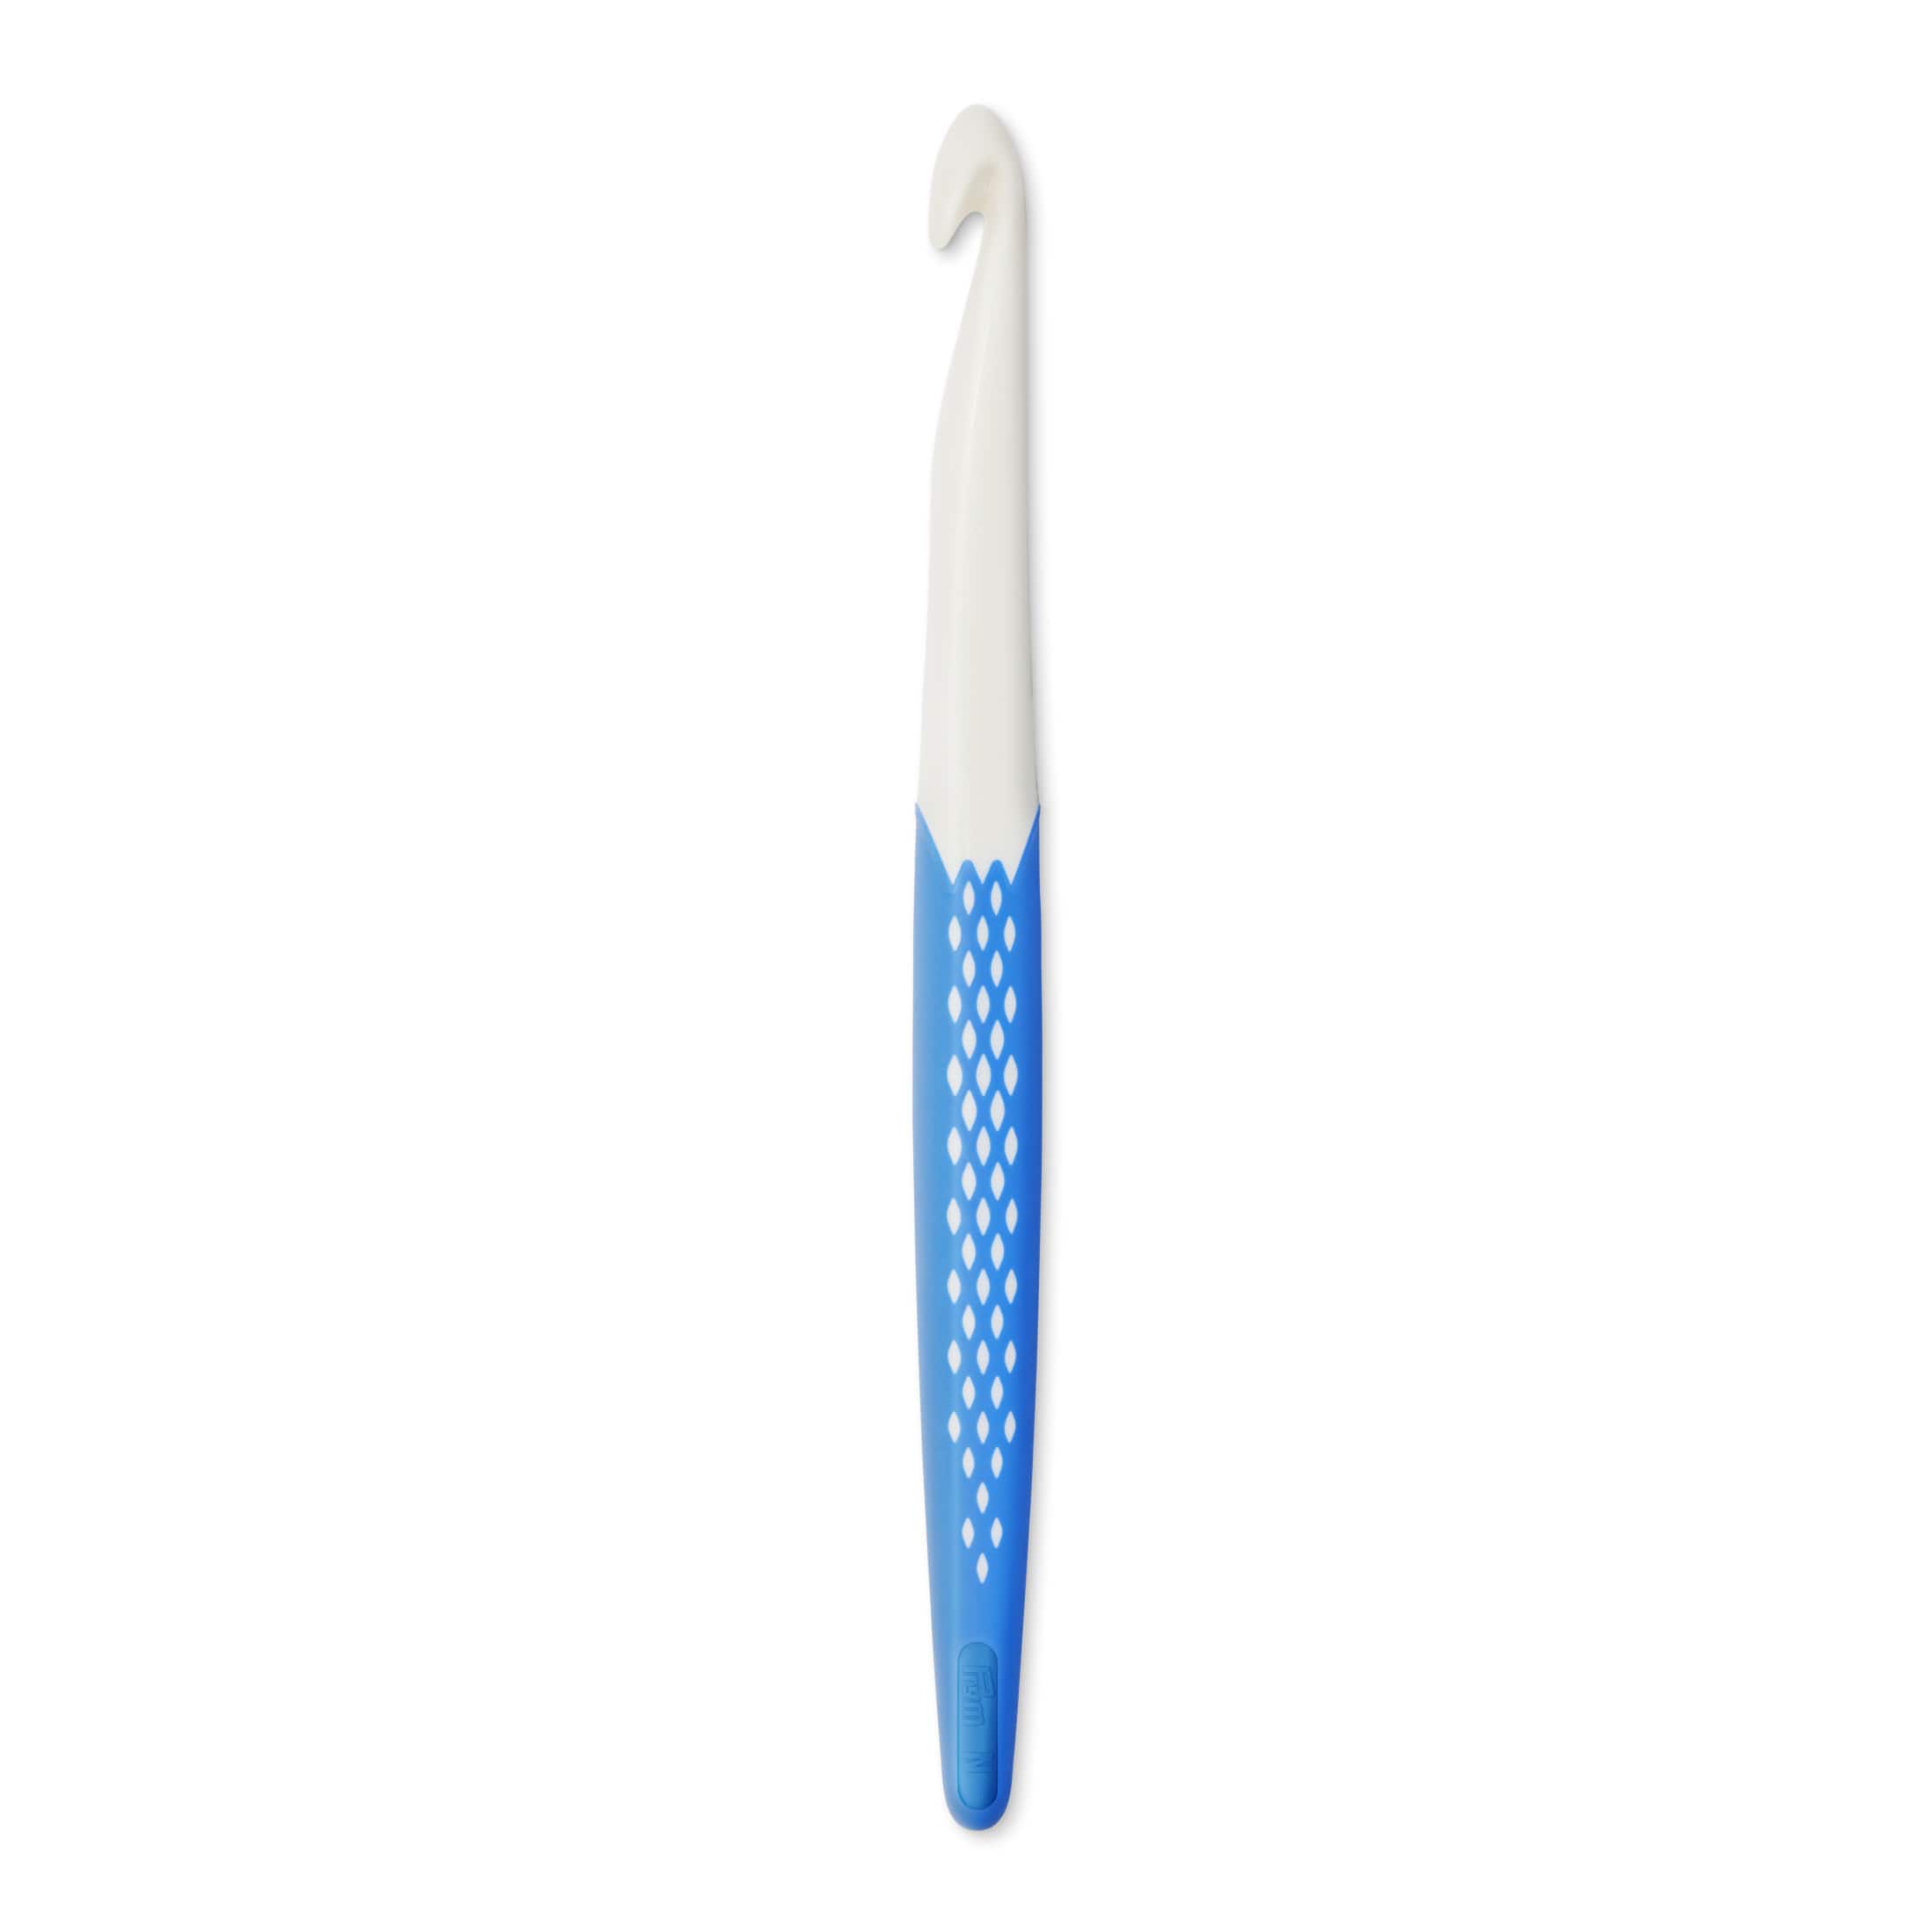 Crochet hook for wool, ergonomic, 10mm/18 From Prym - Knitting and